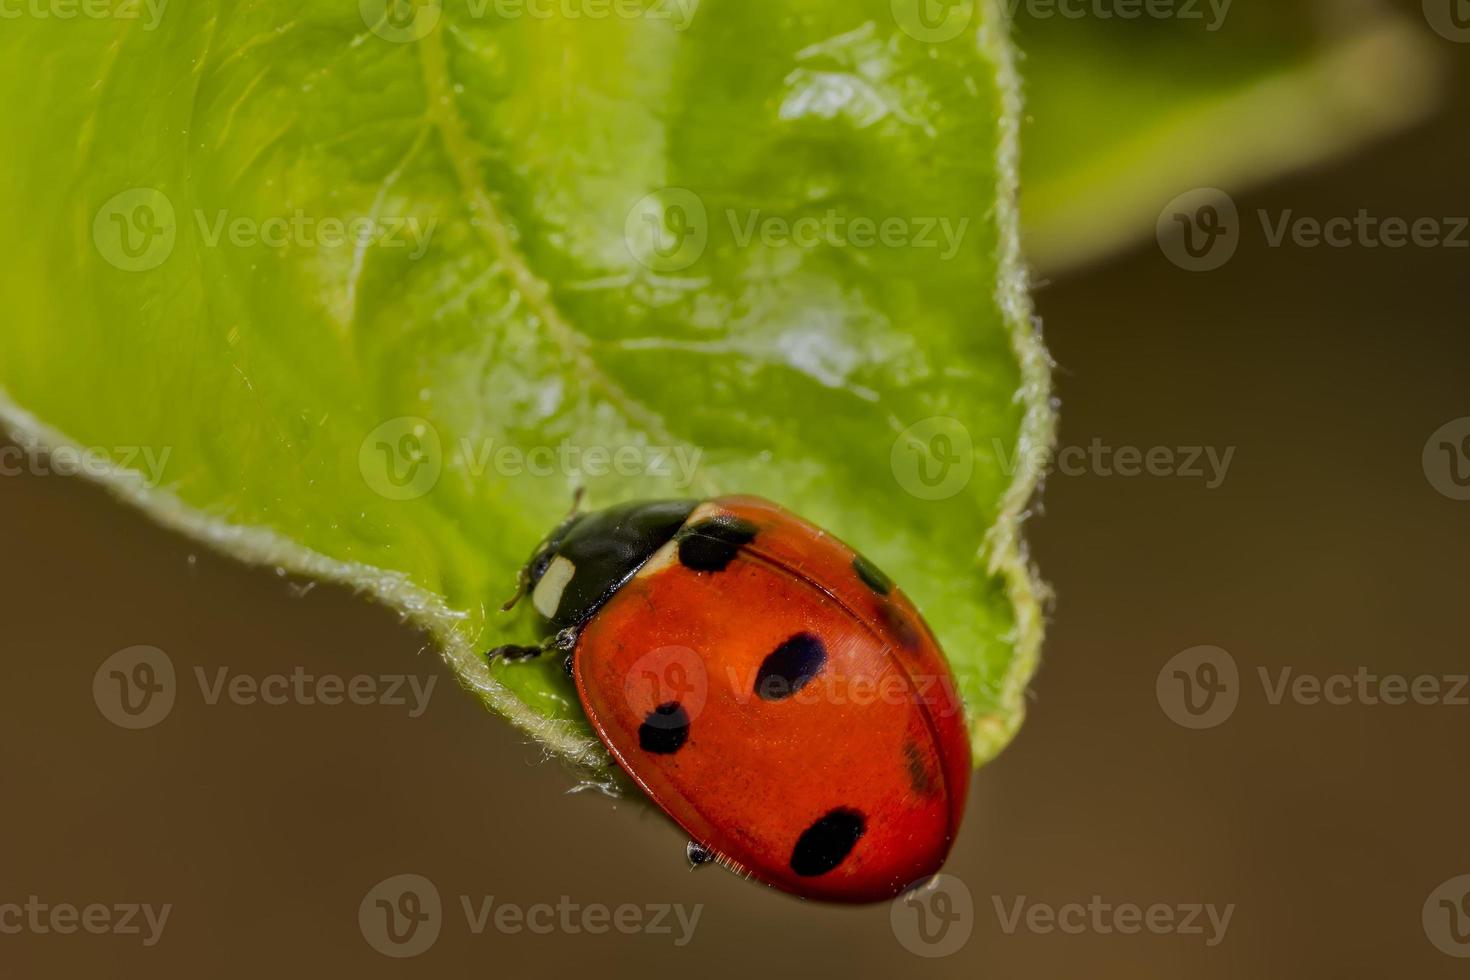 The Ladybird sits on a colored leaf. Macro photo of ladybug close-up. Coccinellidae.